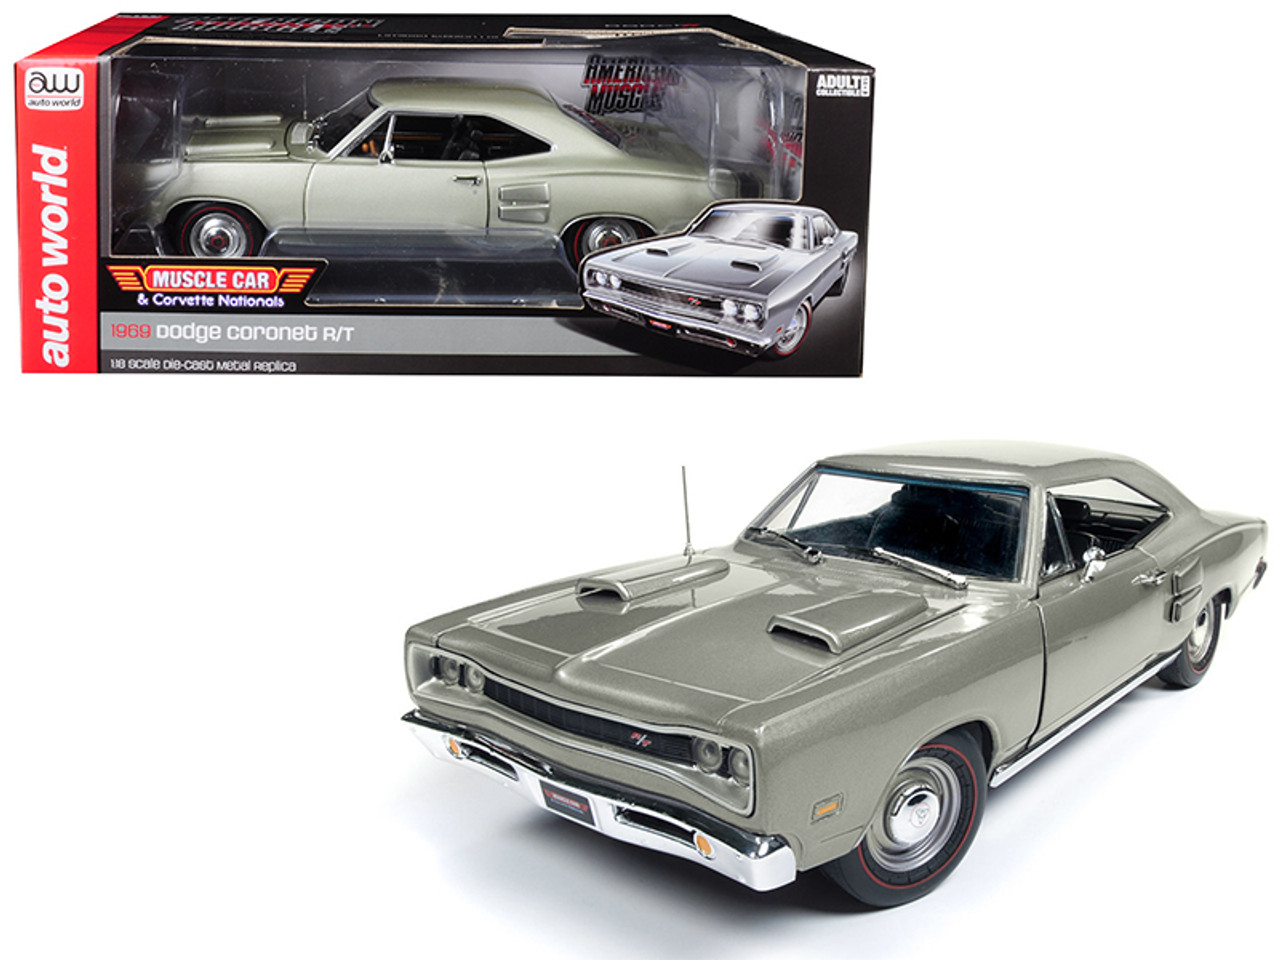 1969 Chevrolet Yenko Nova SS Gloss Black MCACN 10th Anniversary Limited Edition to 1002 Pieces Worldwide 1/18 Diecast Model Car by Autoworld AMM1178